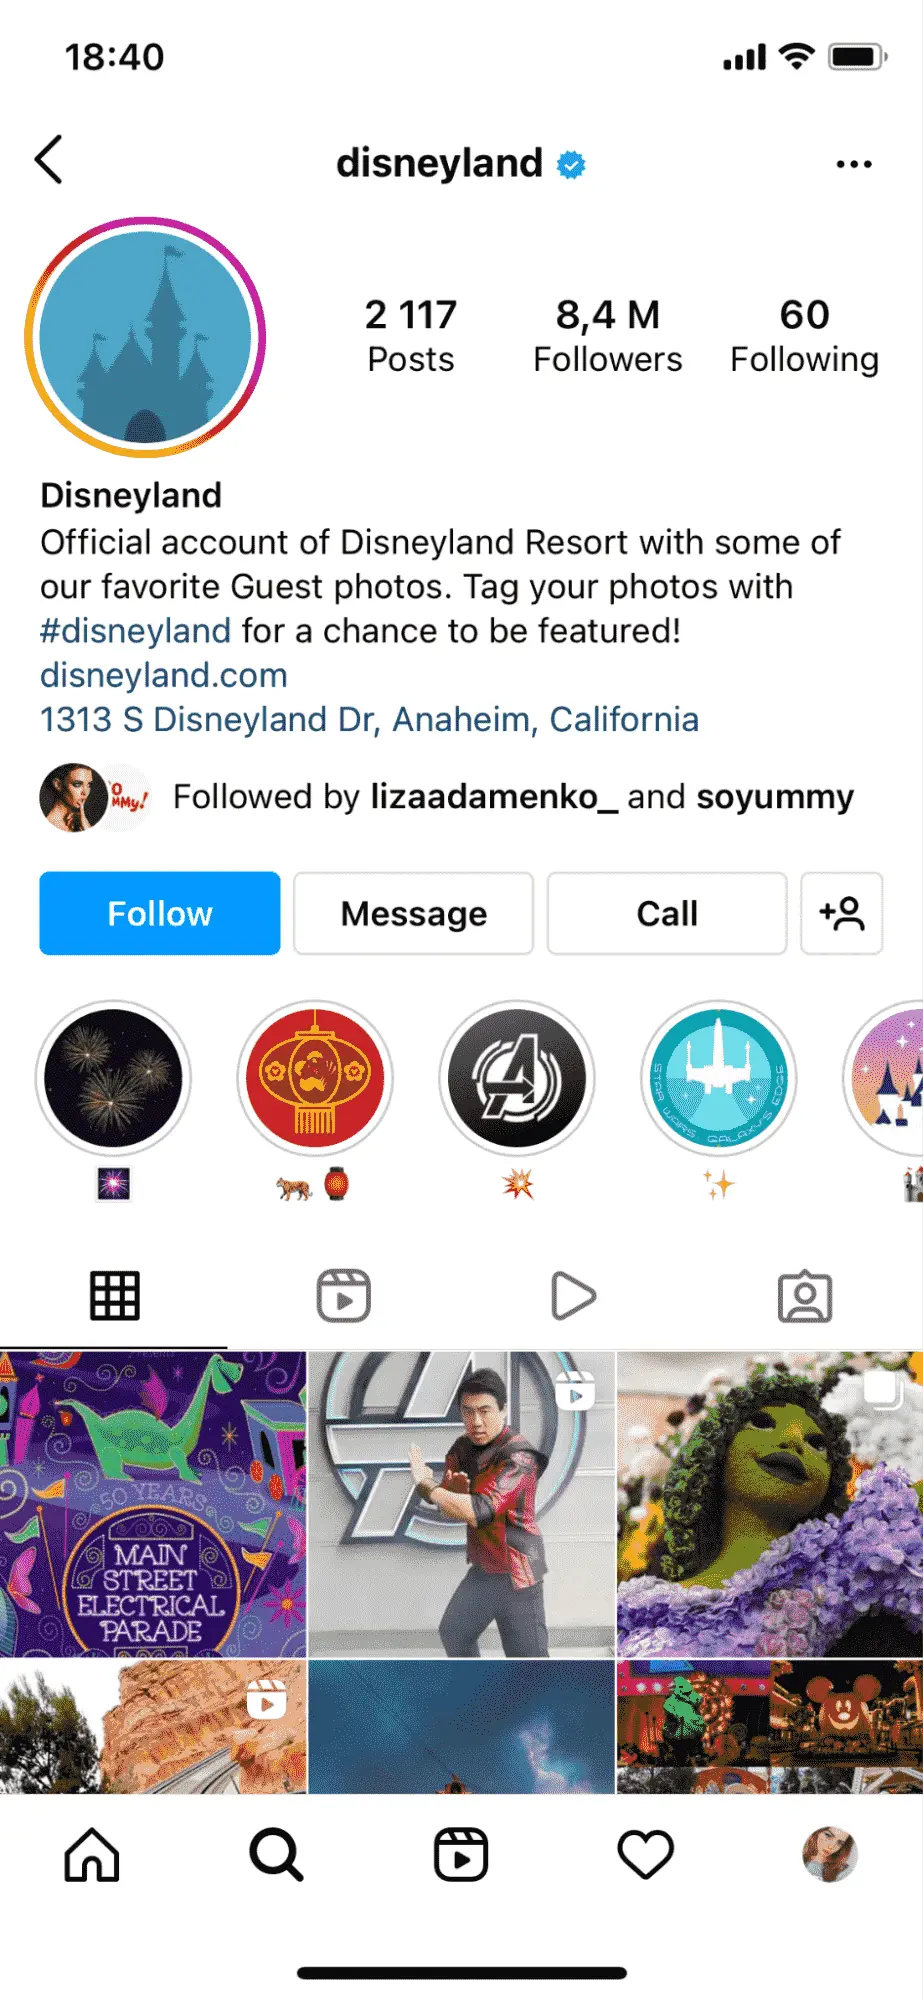 Screenshot shows that Disneyland includes its trademarked hashtag in the bio